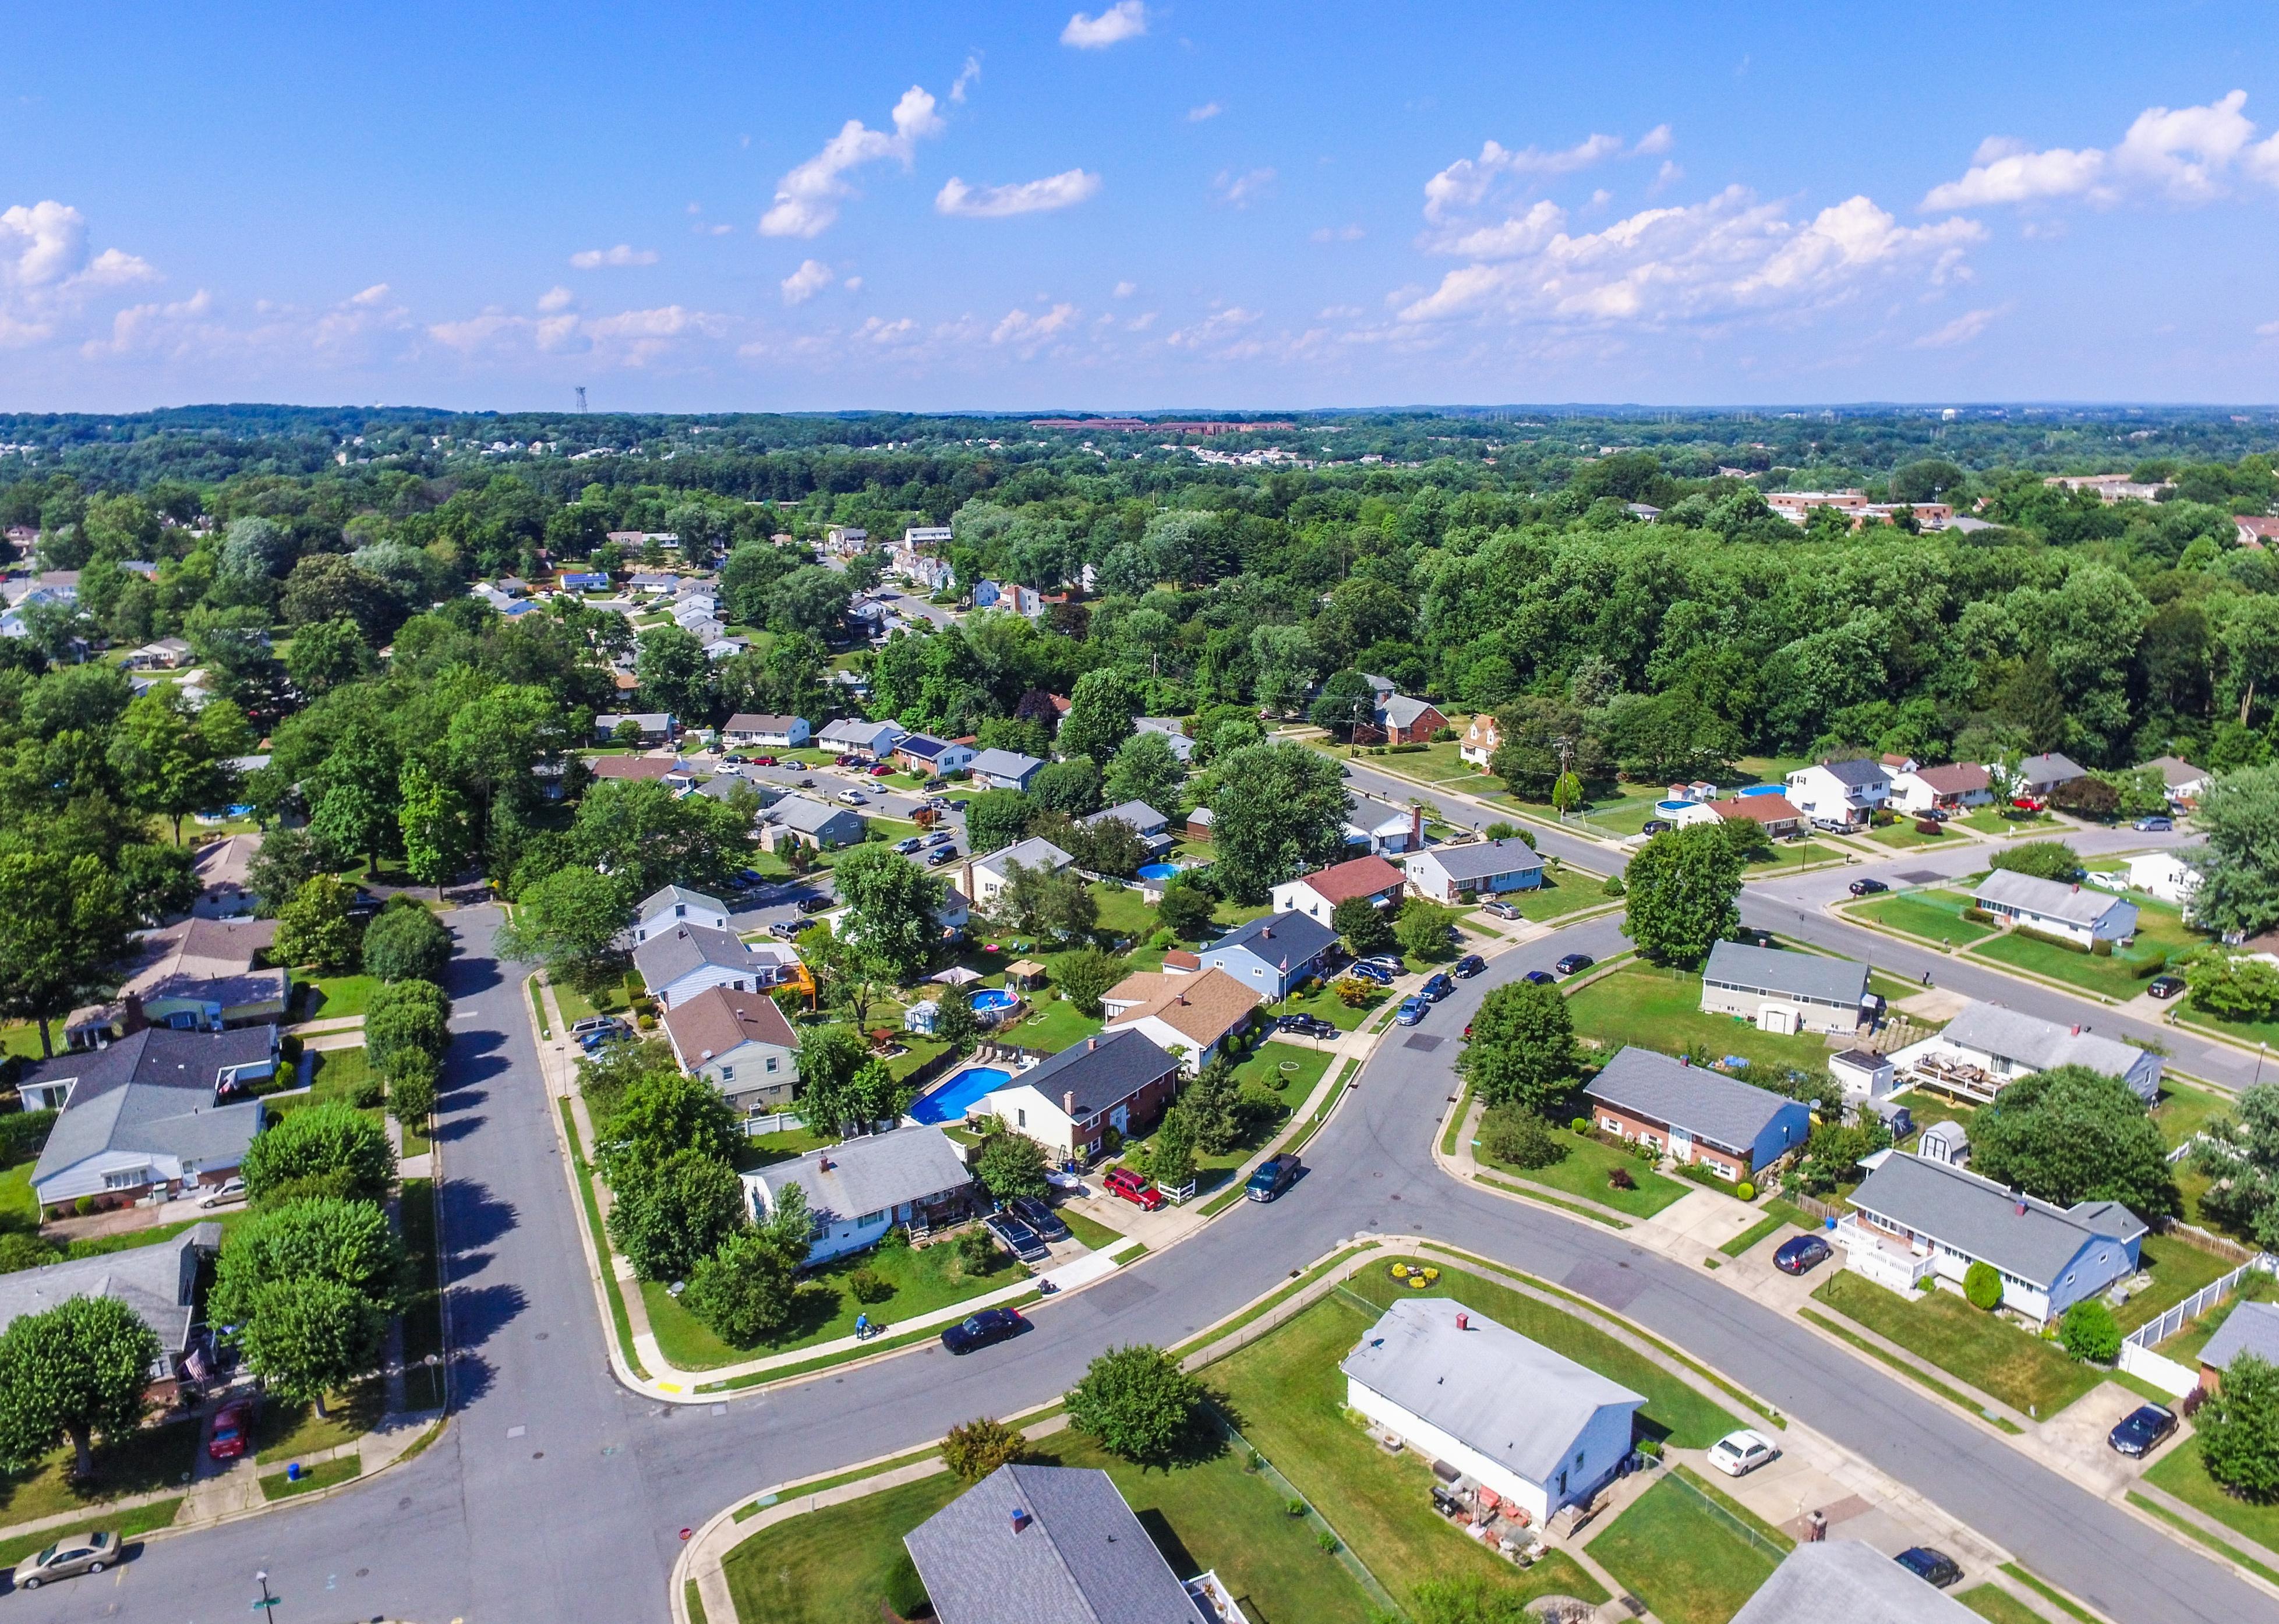 Aerial view of suburban community in summer.